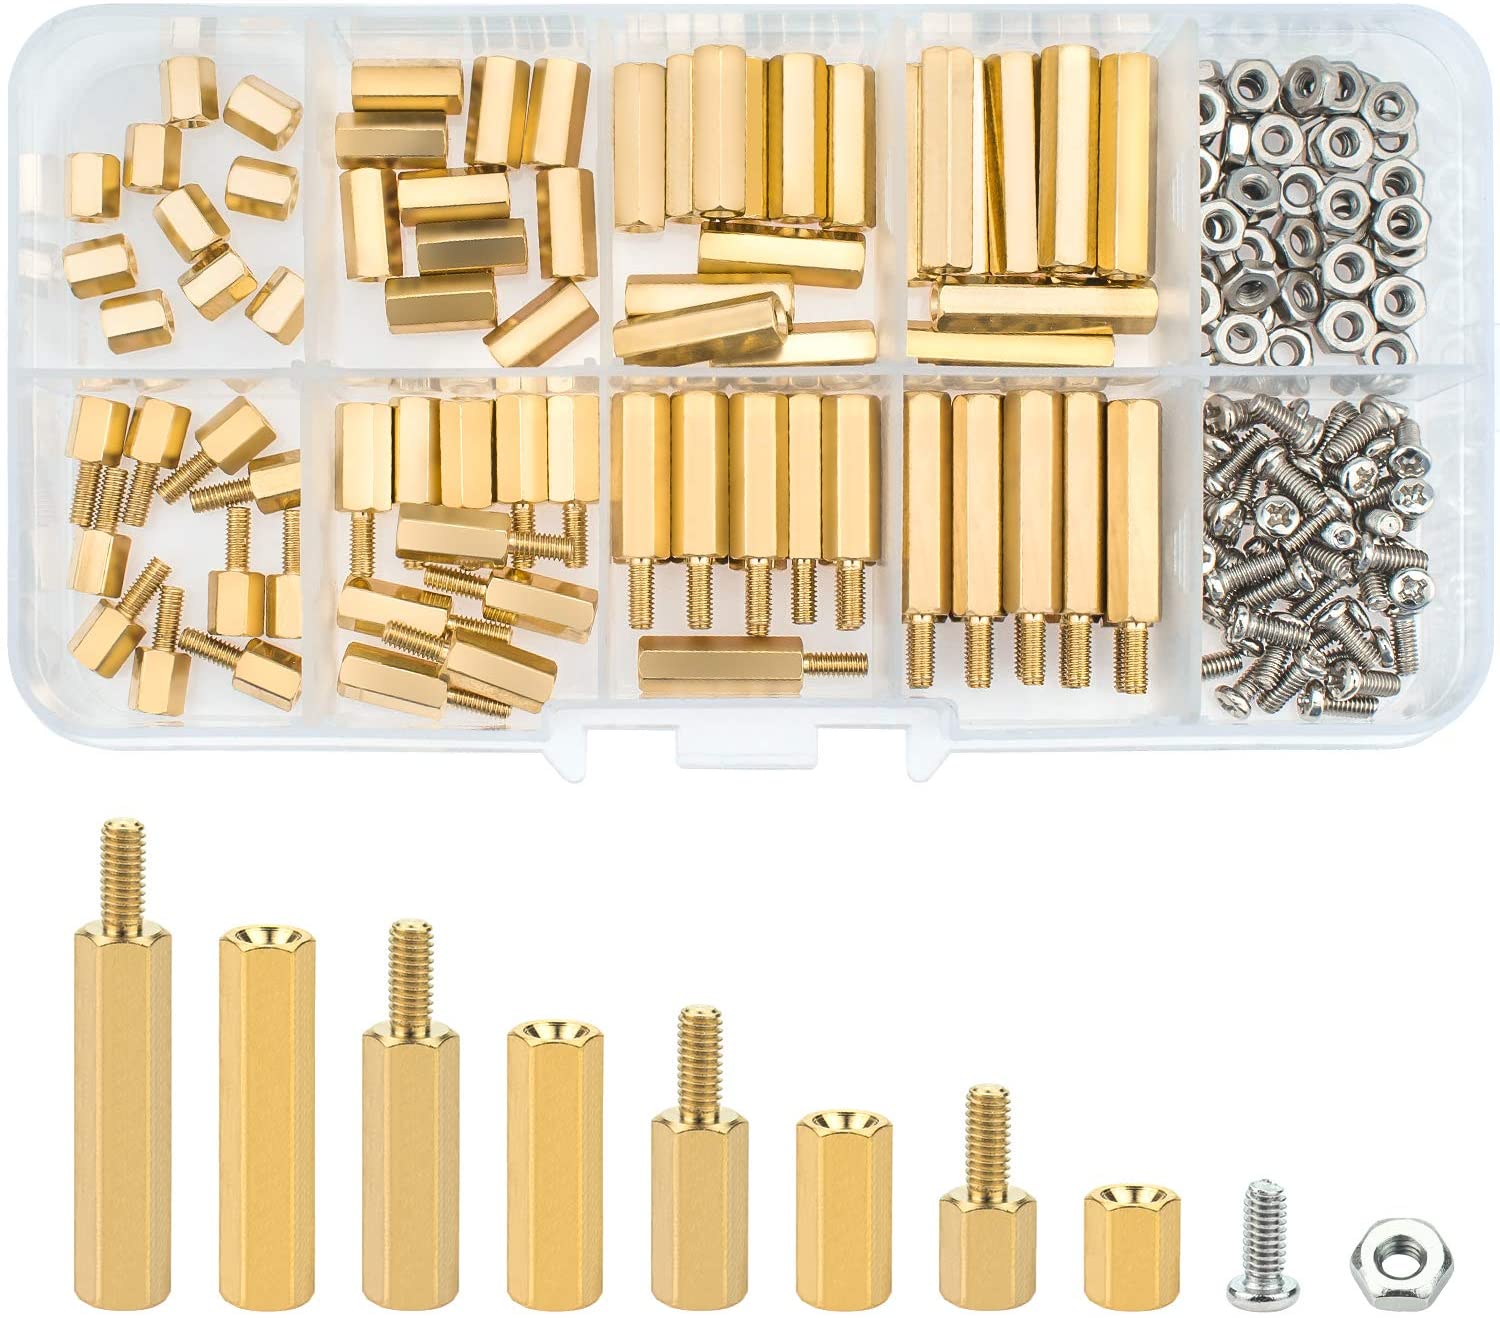 180pcs/set M2.5 Male Female Hex Brass Standoff Spacer with Pan Head Screw Nut and Washer Assortment Kit PCB Board Standoff